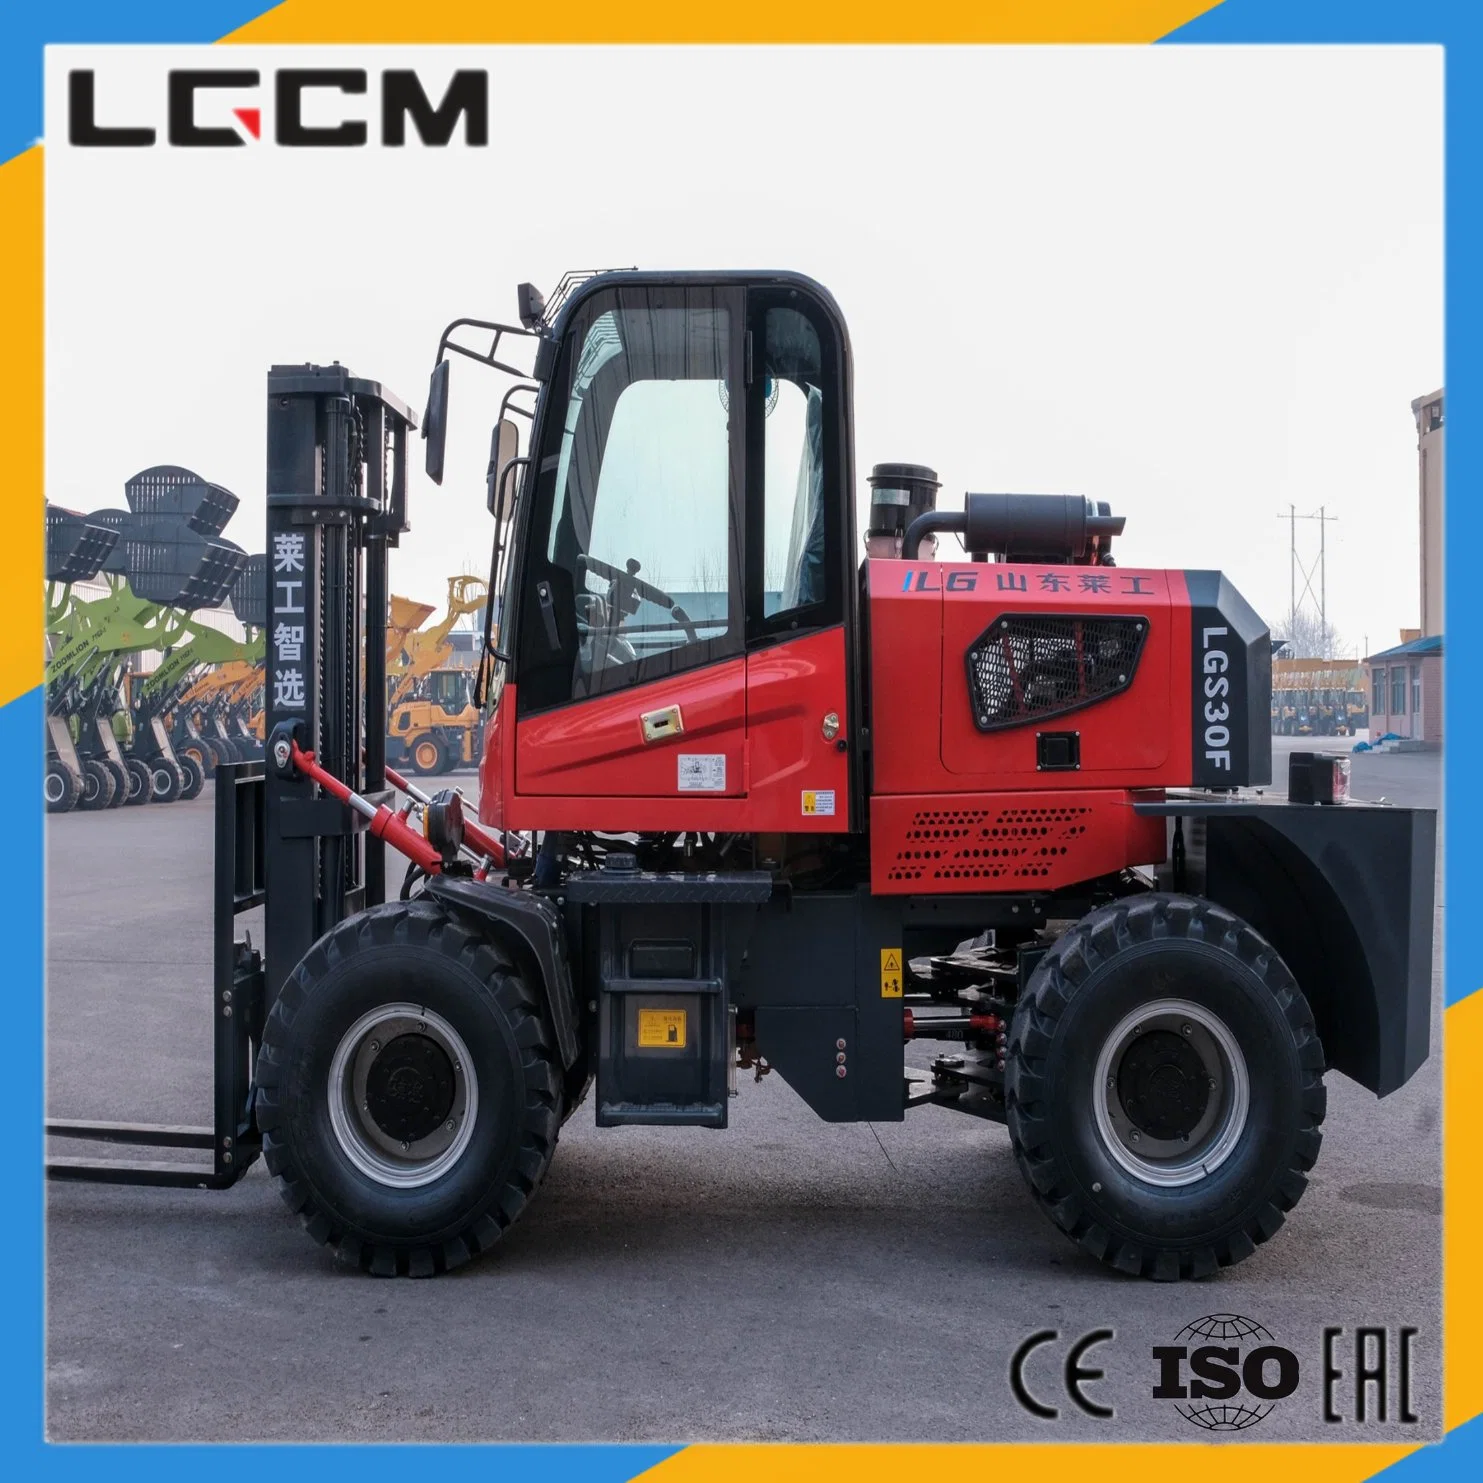 Lgcm off Road Forklift 1.5ton 3ton 3.5ton 4ton 5ton 4WD Four Wheels Drive New Articulated Rough Terrain Forklift Cab CE for Narrow Aisle Working